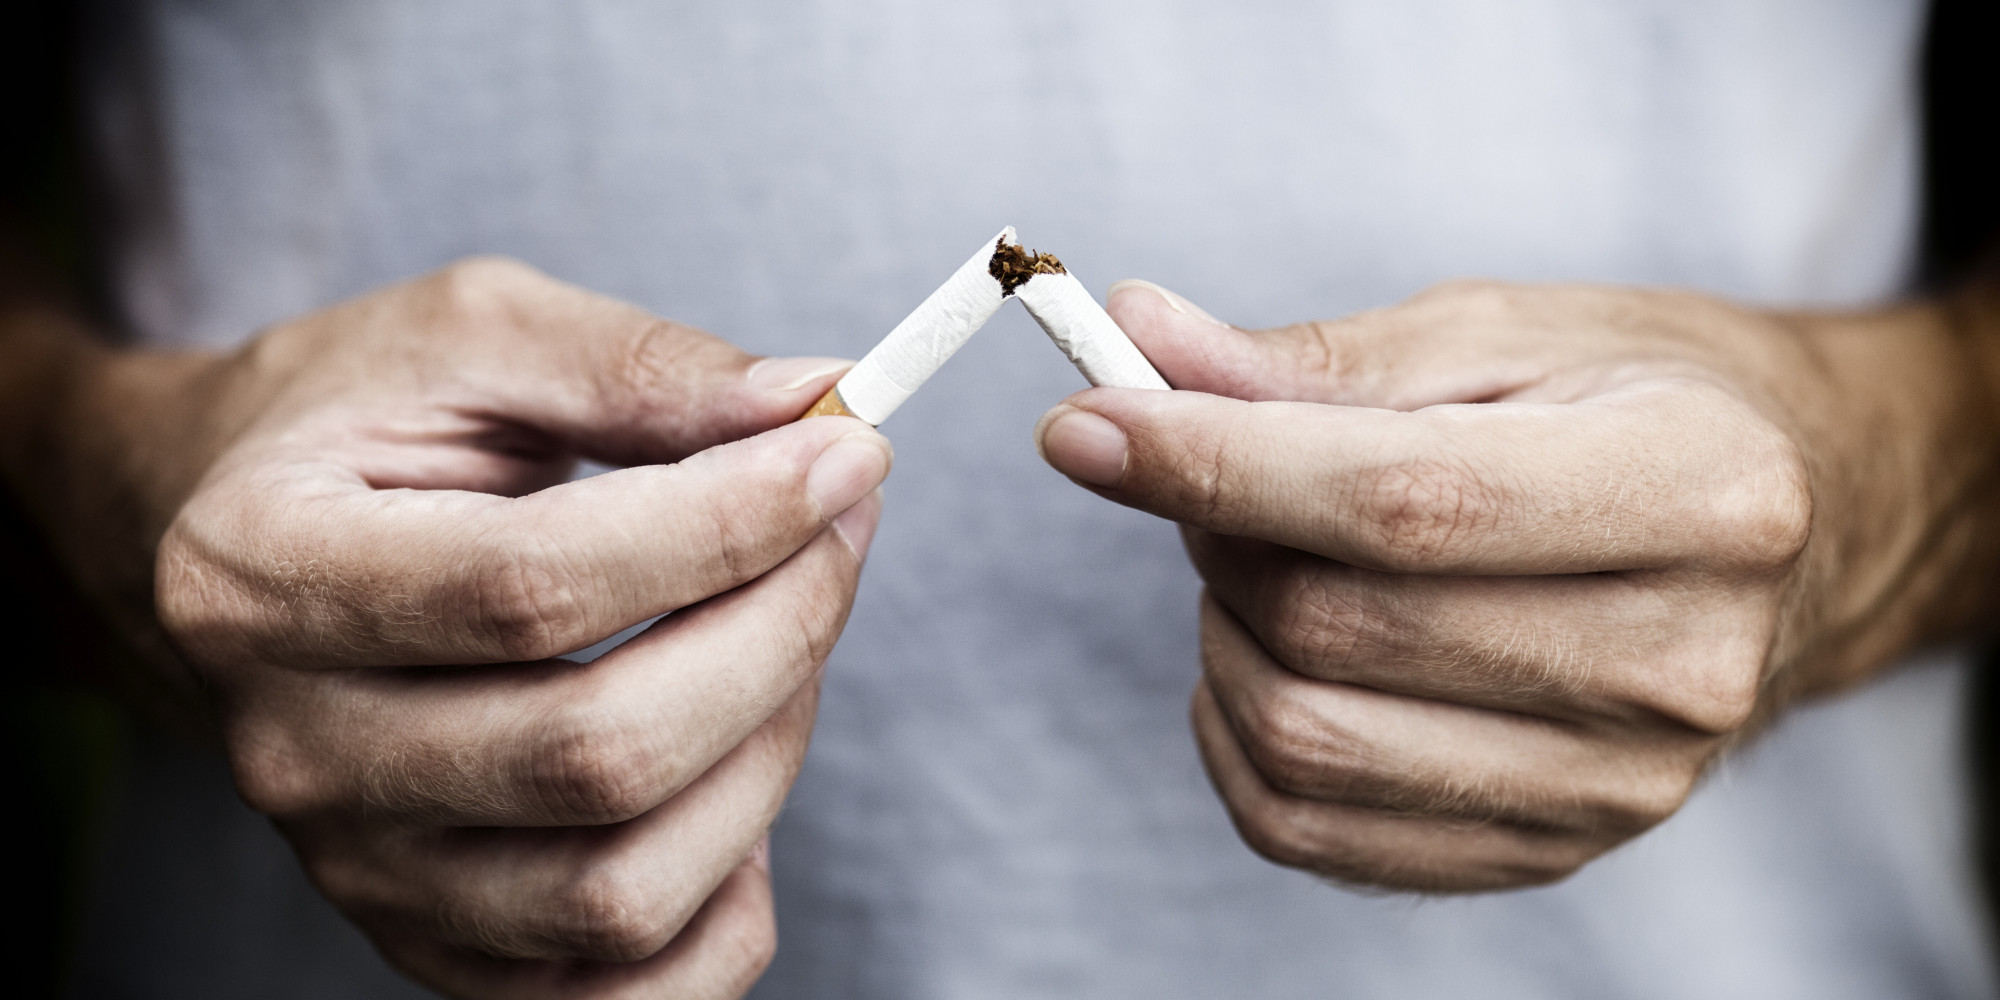 How Your Menstrual Cycle Could Affect Attempts To Quit Smoking